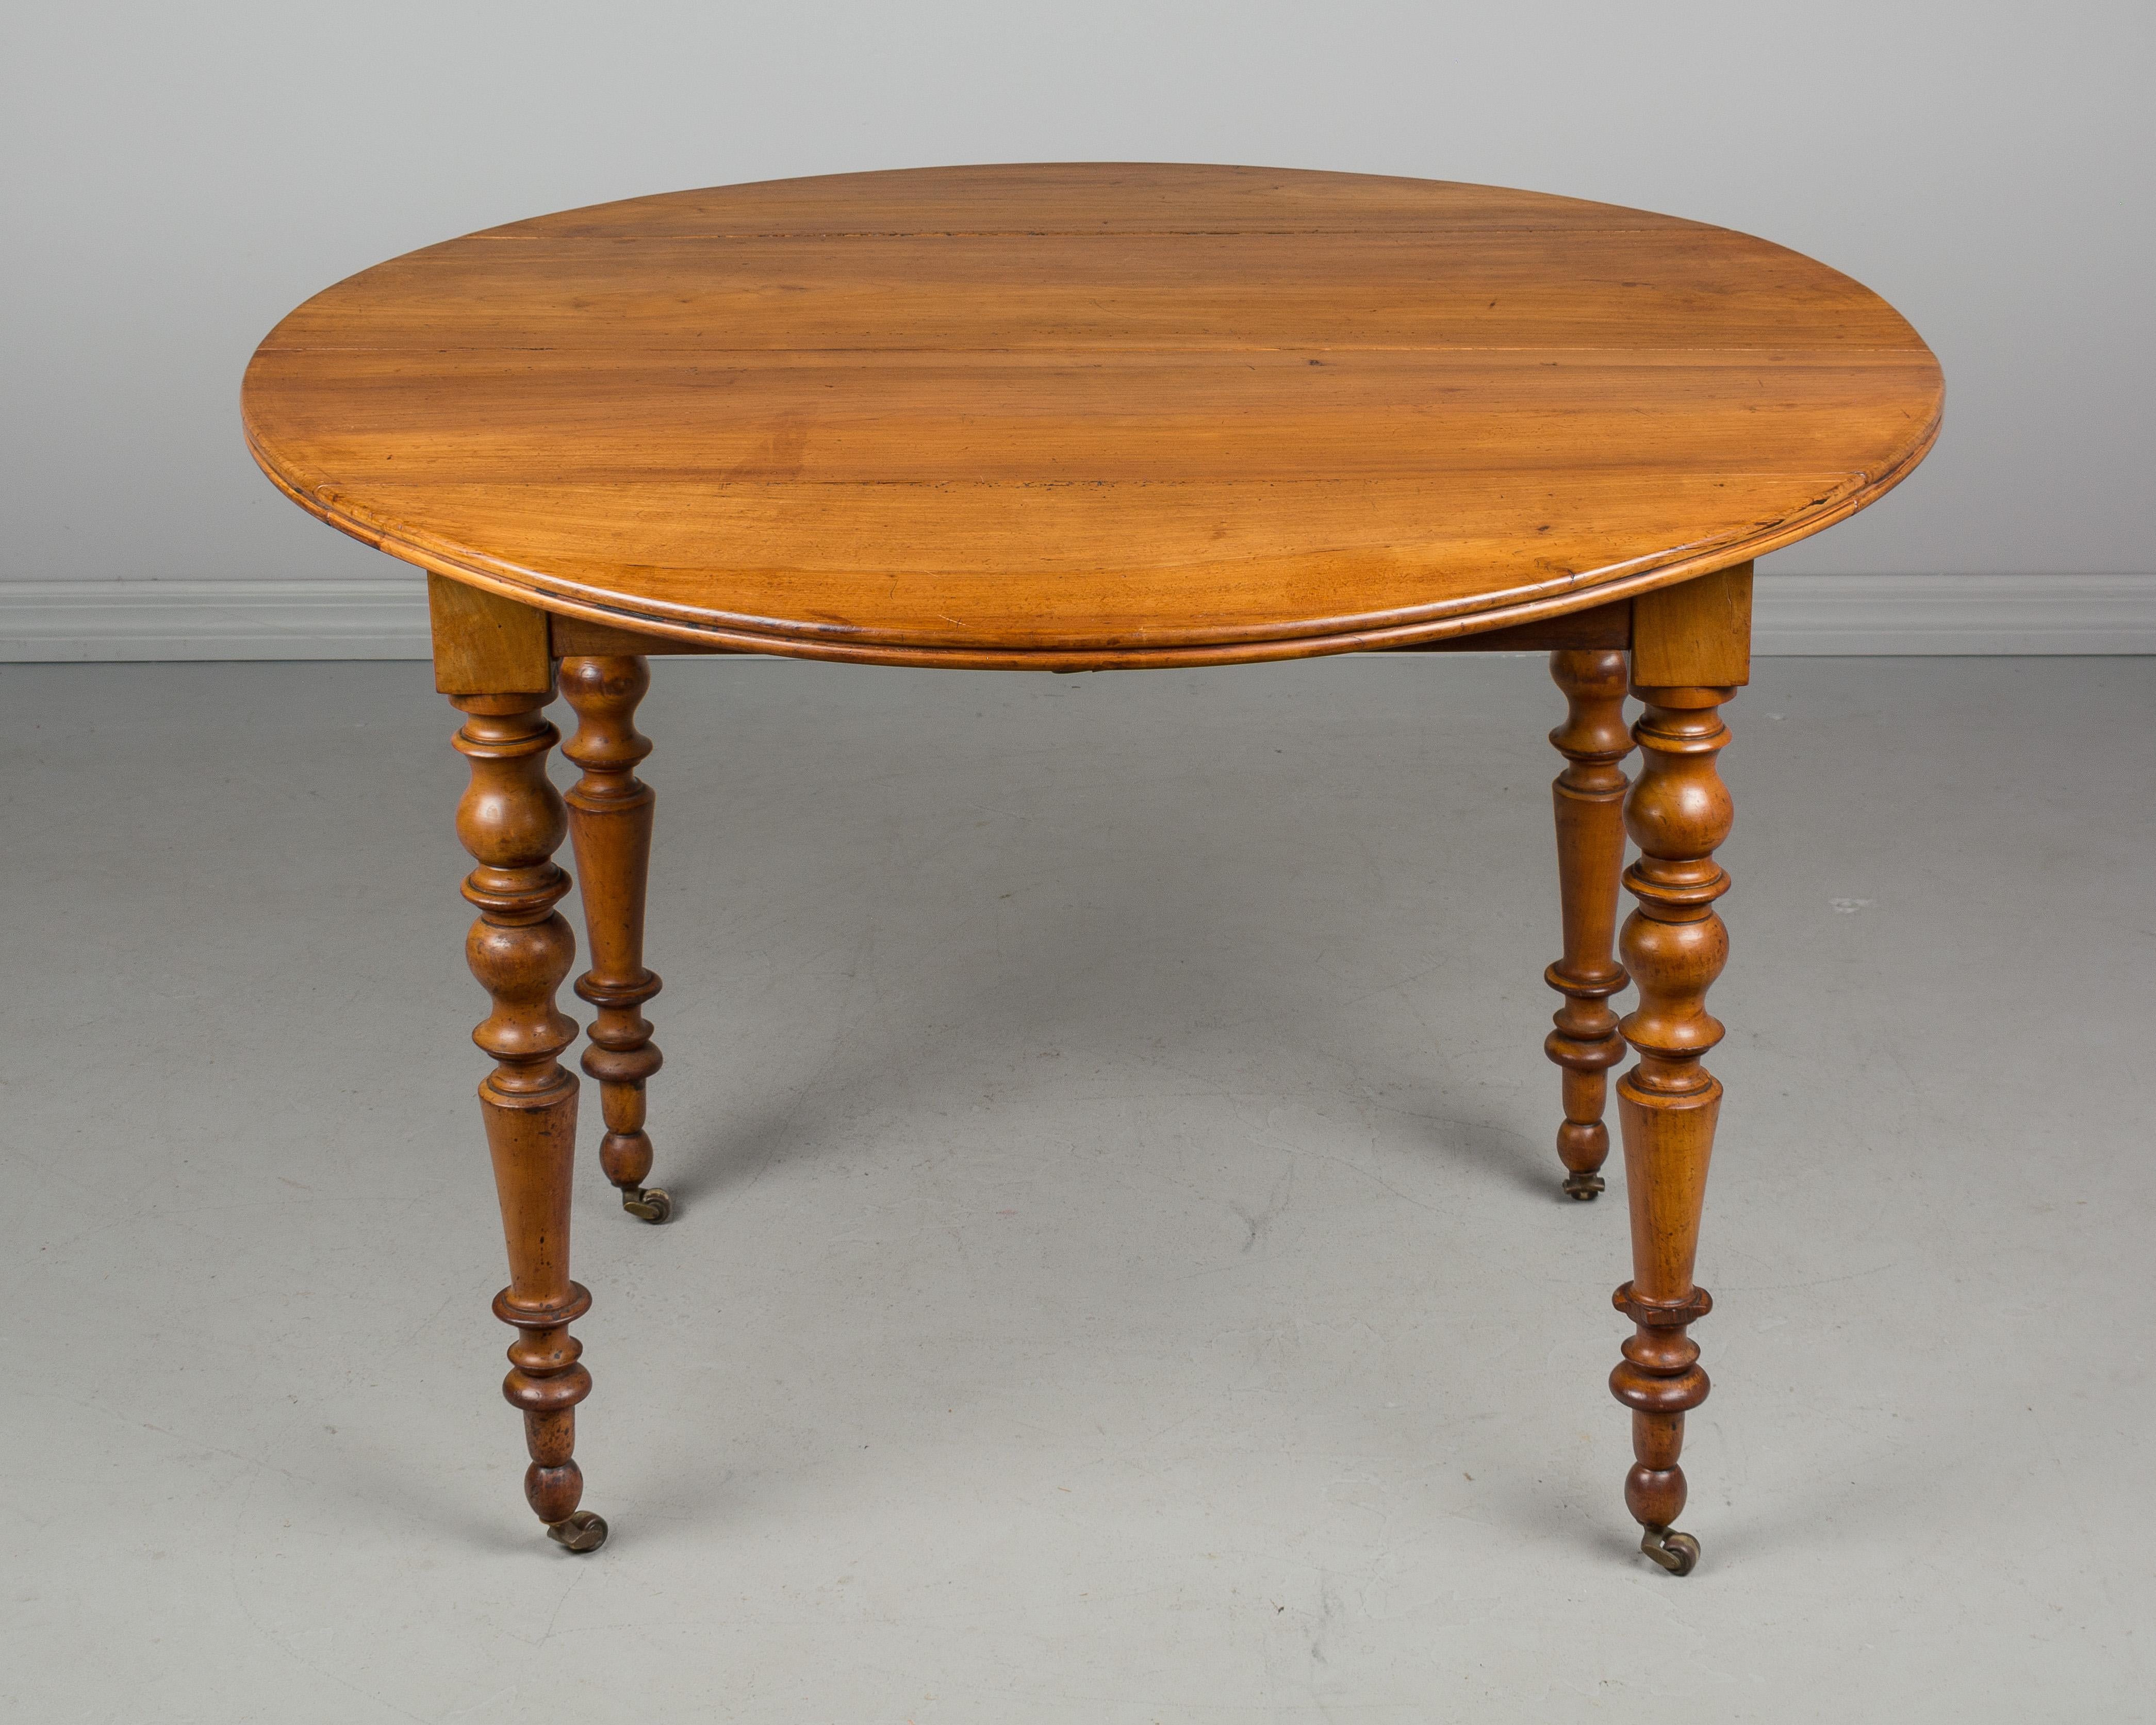 A Louis Philippe style drop-leaf dining table from Normandy. Made of cheerywood with four turned legs on brass castors. Wood has beautiful honey color with waxed finish. New runner for the extensions but no leaves for the table (extends to 79